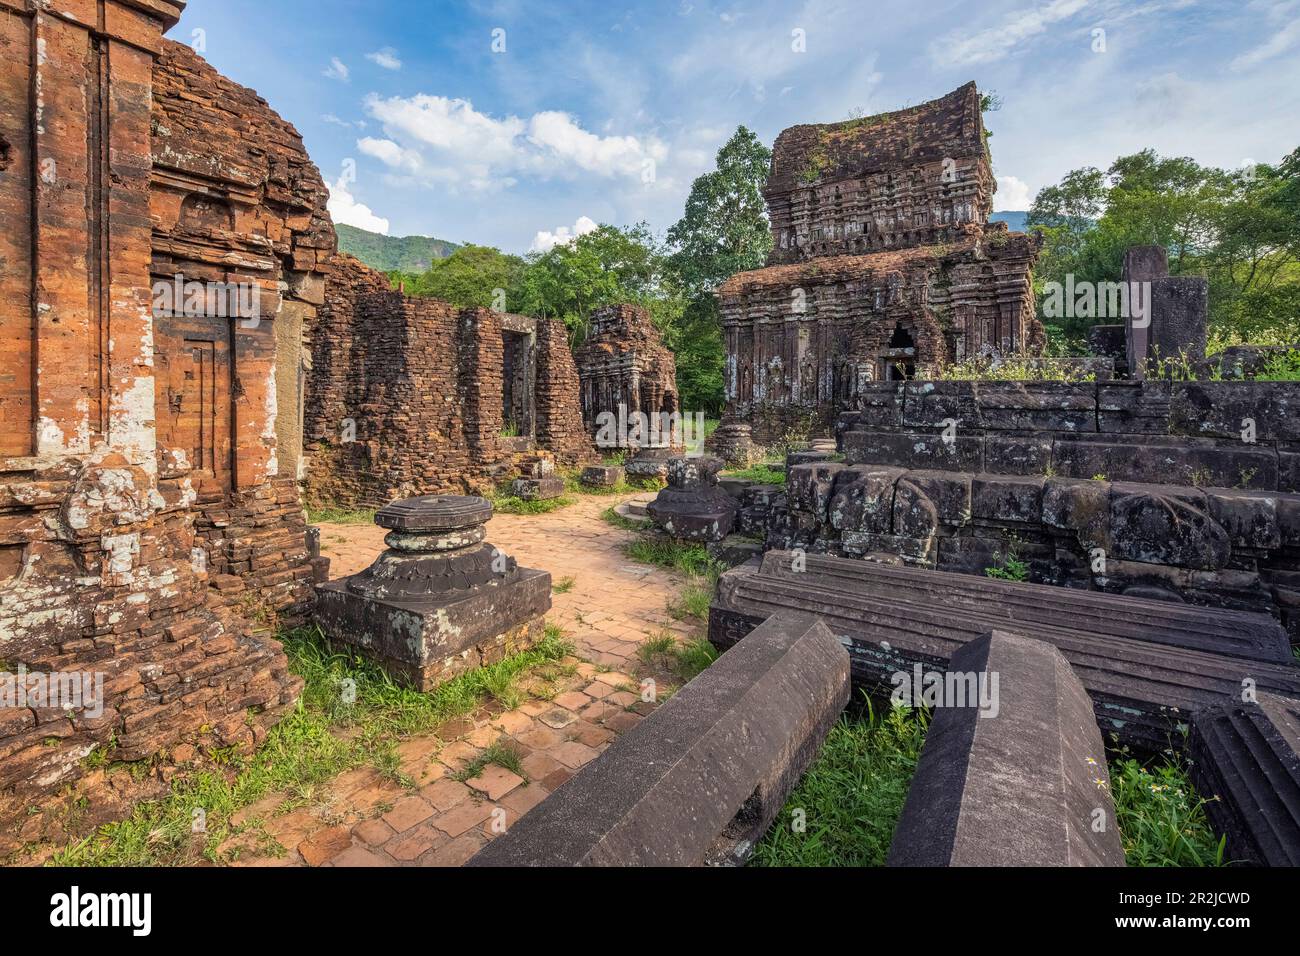 MY SON SANCTUARY IS A LARGE COMPLEX OF RELIGIOUS RELICS COMPRISES CHAM ARCHITECTURAL WORKS. A UNESCO WORLD HERITAGE SITE IN QUANG NAM, VIETNAM. Stock Photo